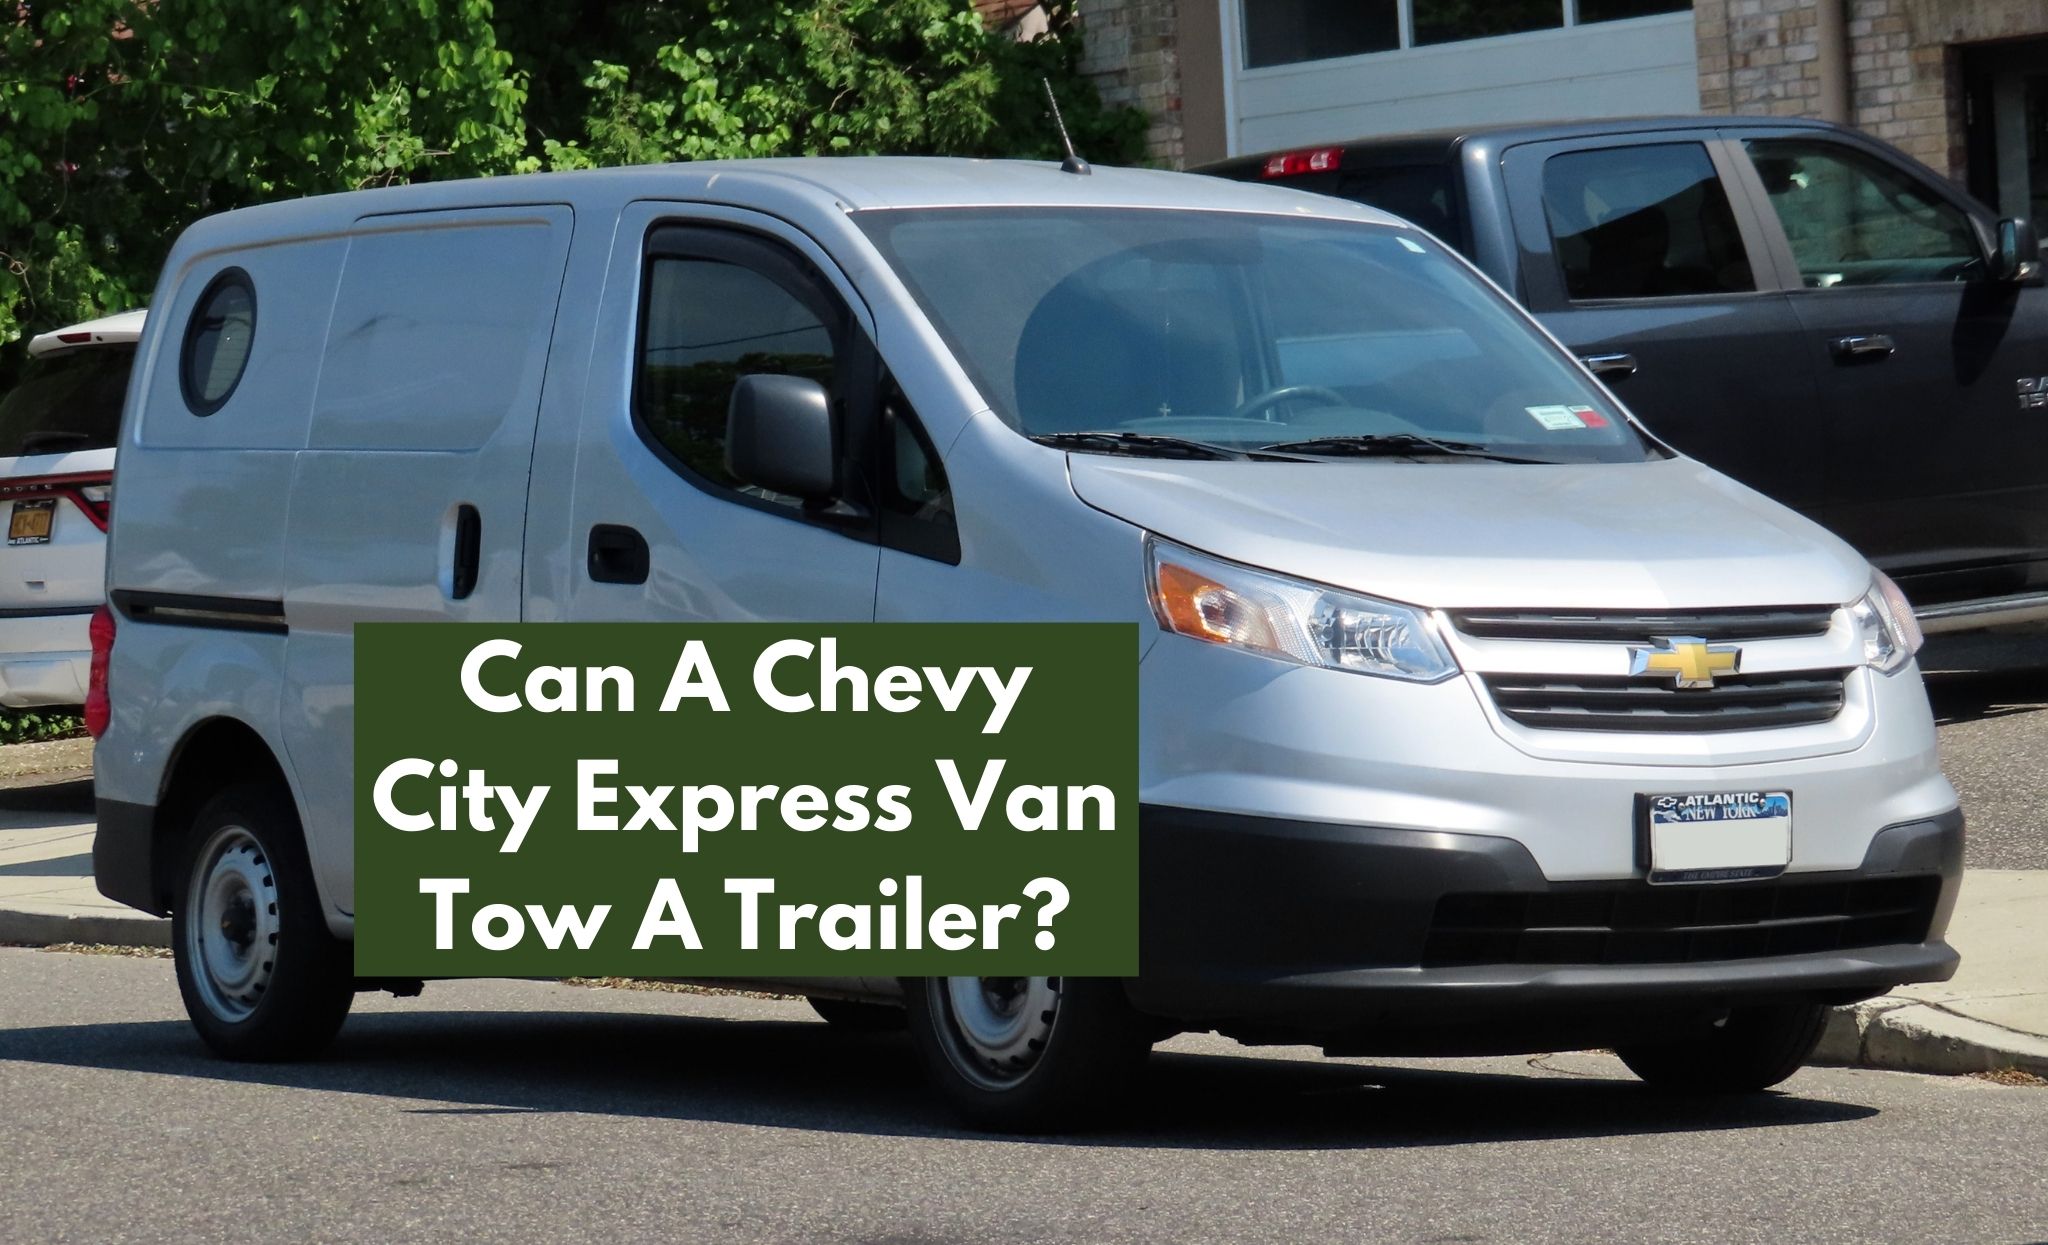 Can A Chevy City Express Van Tow A Trailer